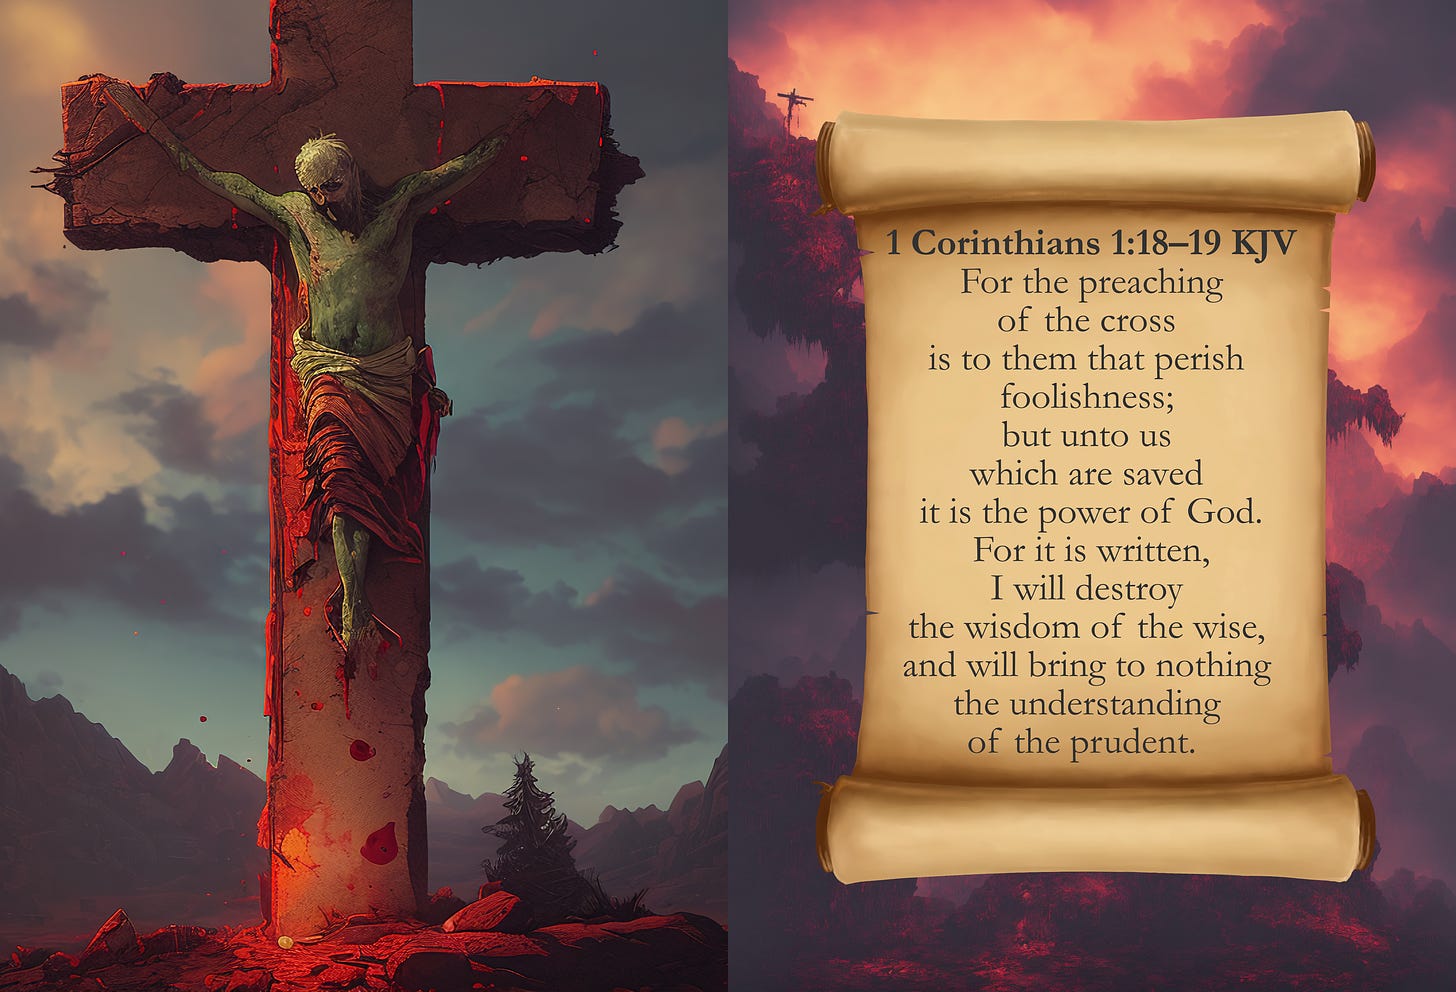 Horrific Old Rugged Cross KJV Card - 1 Corinthians 1:18–19 KJV - For the preaching of the cross is to them that perish foolishness; but unto us which are saved it is the power of God. For it is written, I will destroy the wisdom of the wise, and will bring to nothing the understanding of the prudent. 